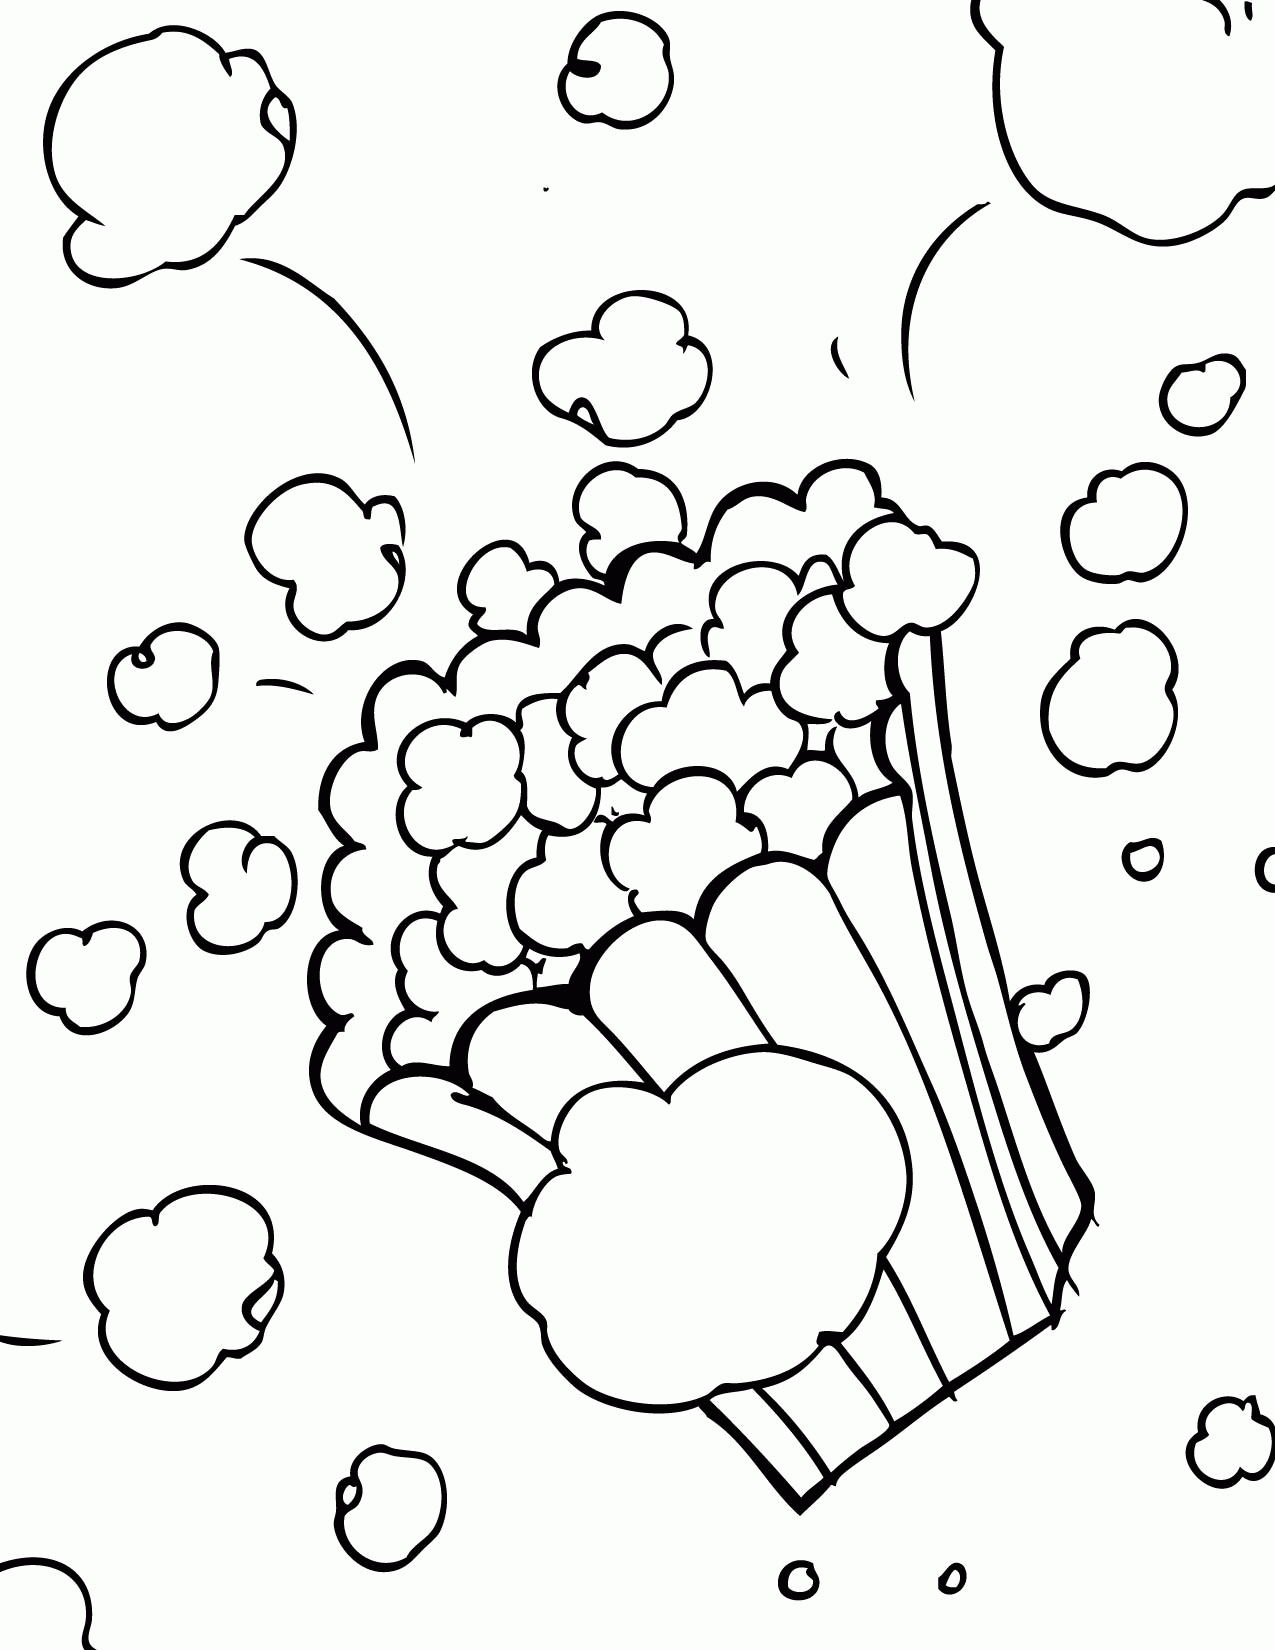 At The Movies Coloring Pages - Handipoints